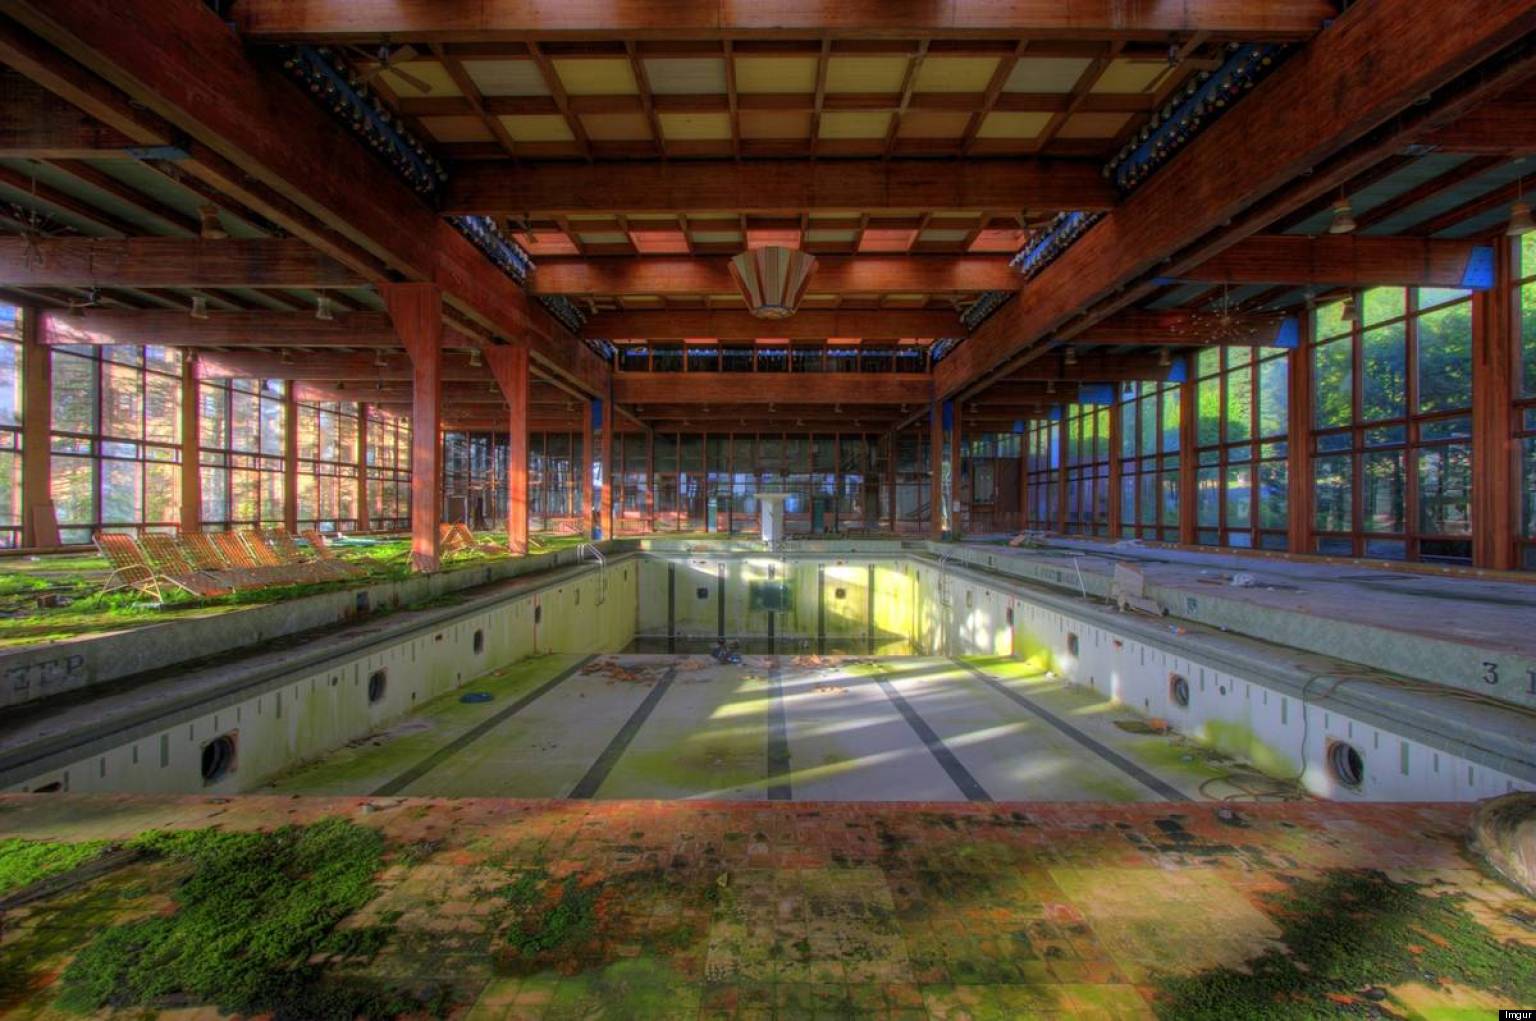 http://i.huffpost.com/gen/1088186/thumbs/o-ABANDONED-PLACES-facebook.jpg